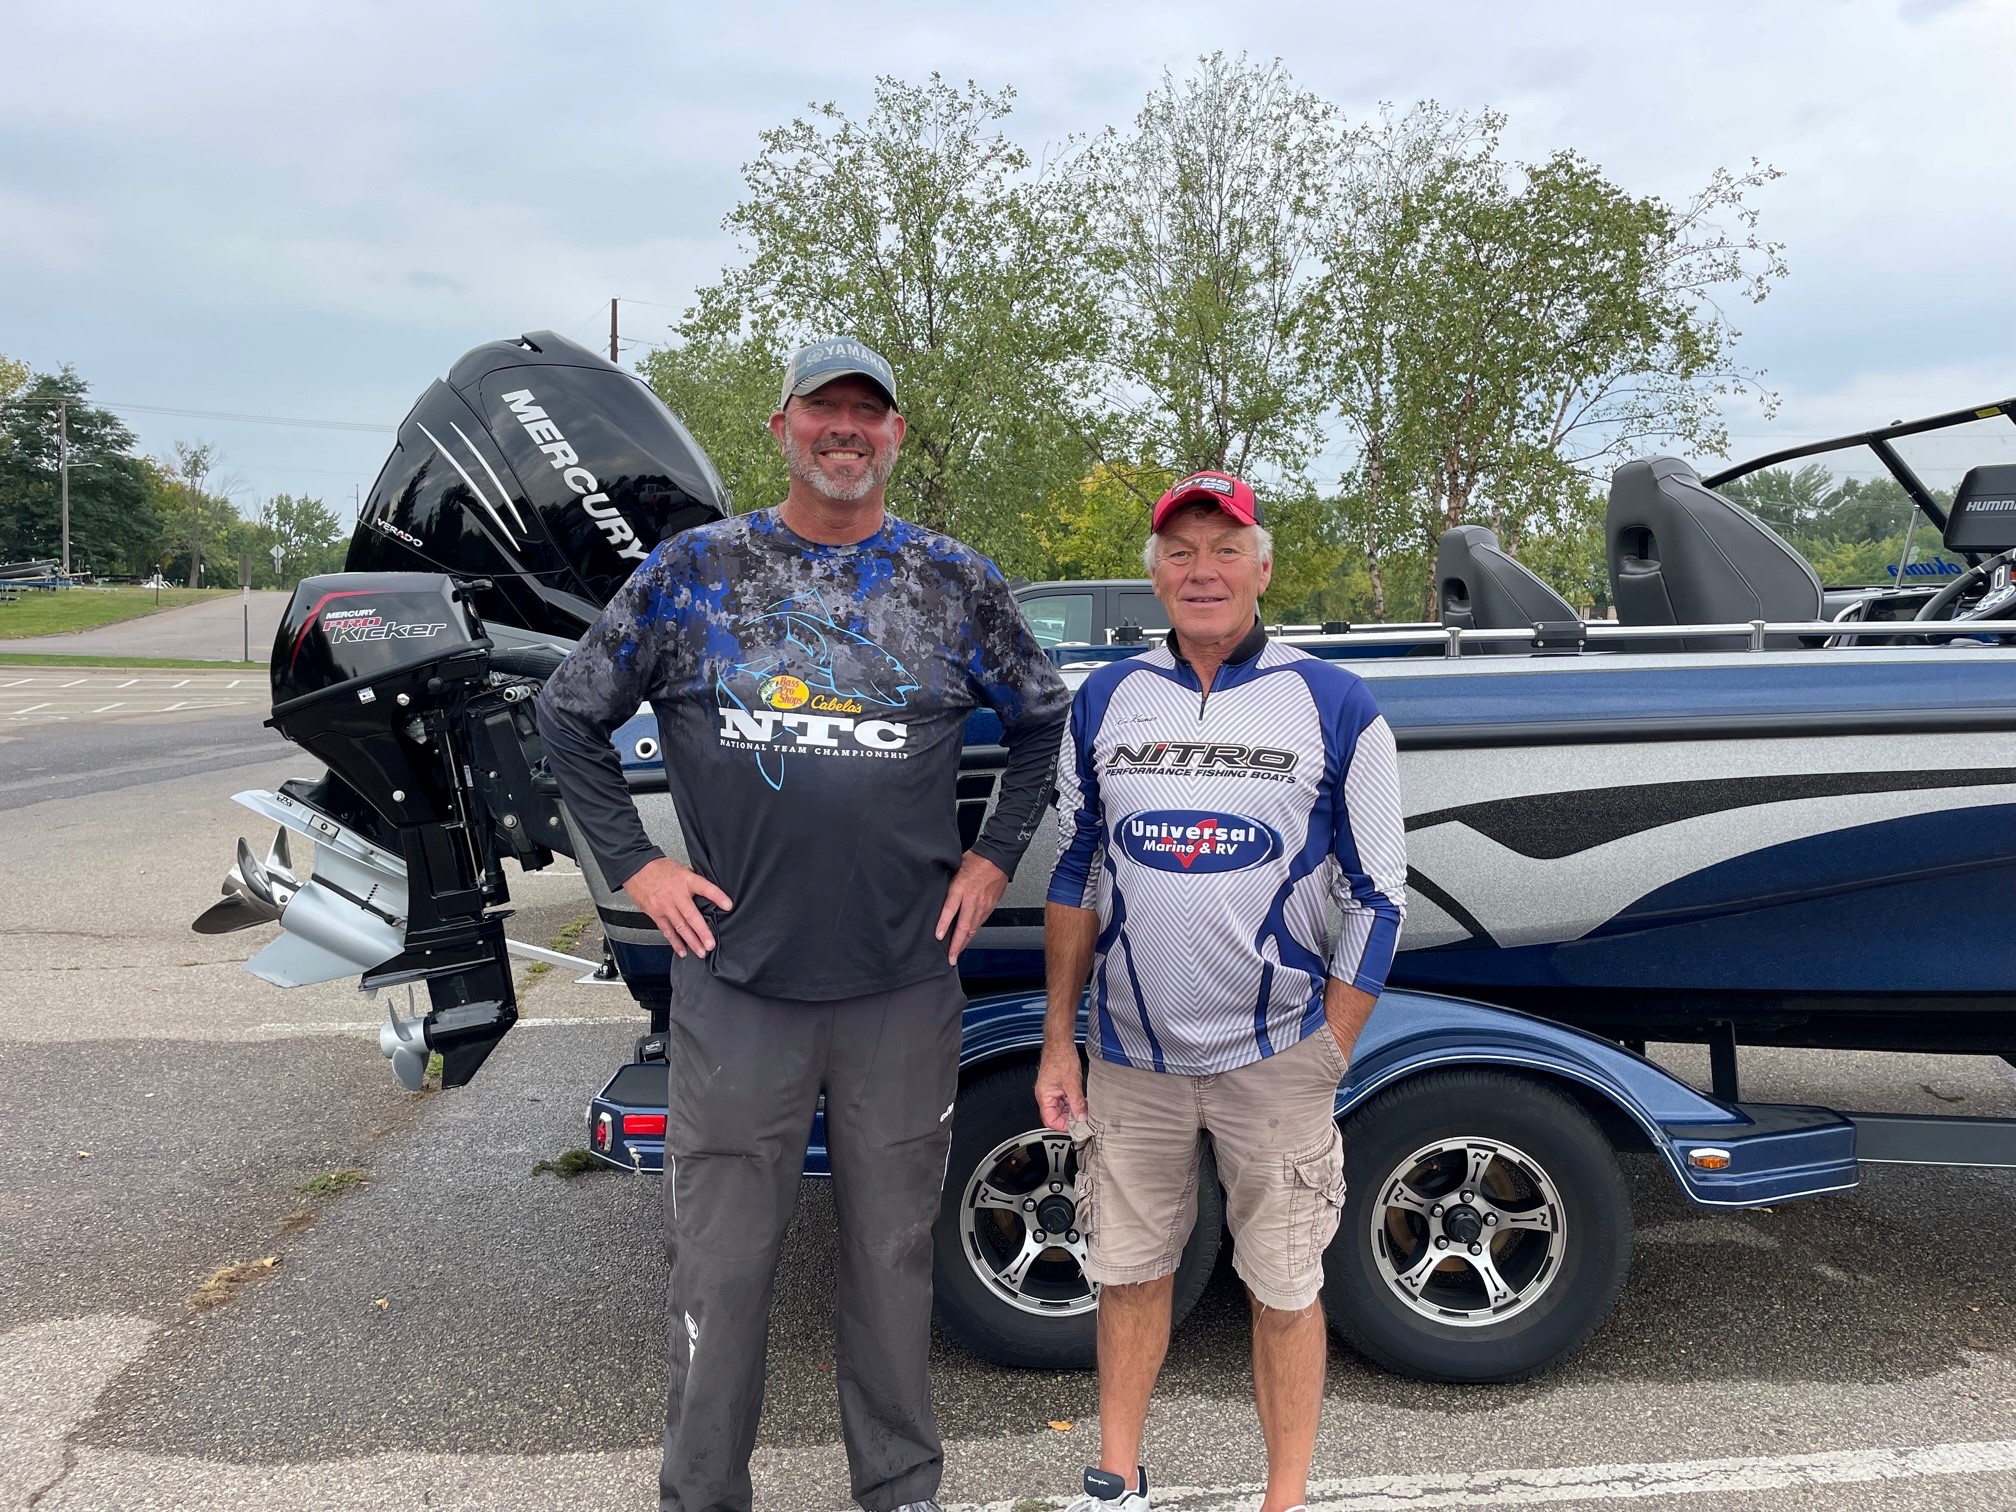 BRWC Q4 - 2nd Place - Tony Hentges and Ken Kramer - 22.36 lbs